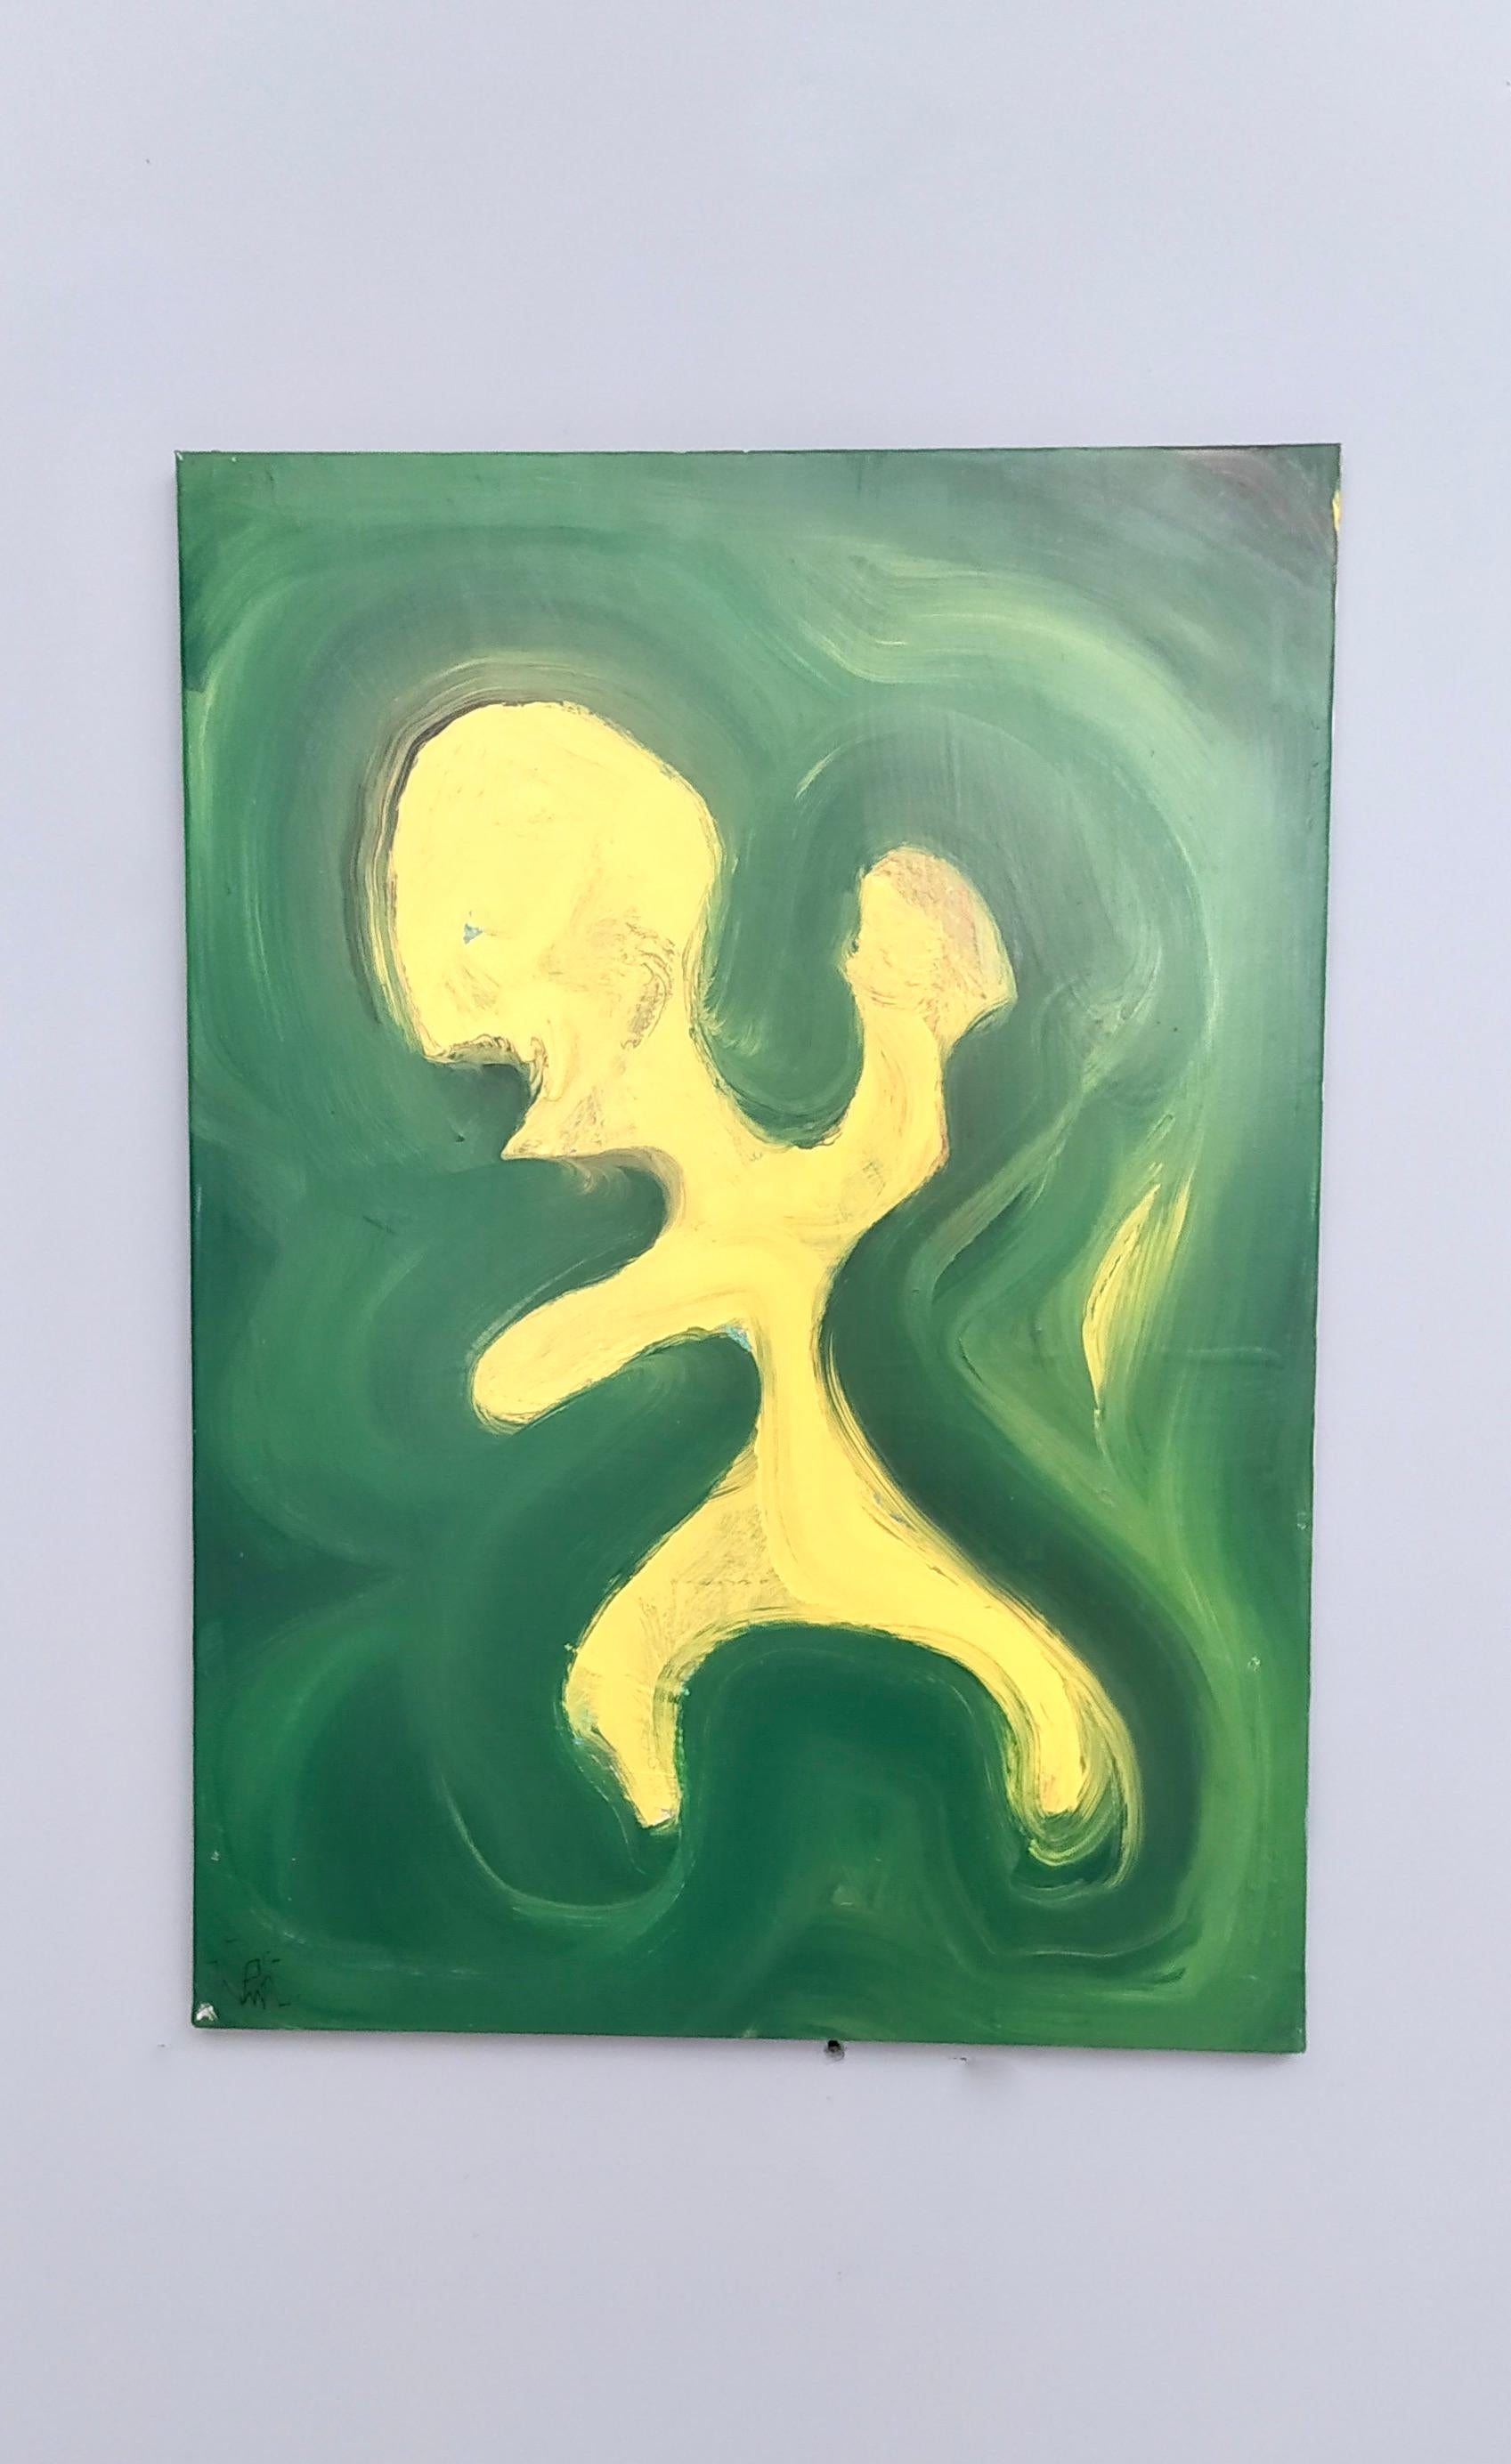 "Embrione" by Enzio Wenk, 2020 - Green and Yellow Acrylic, Neo-Expressionism